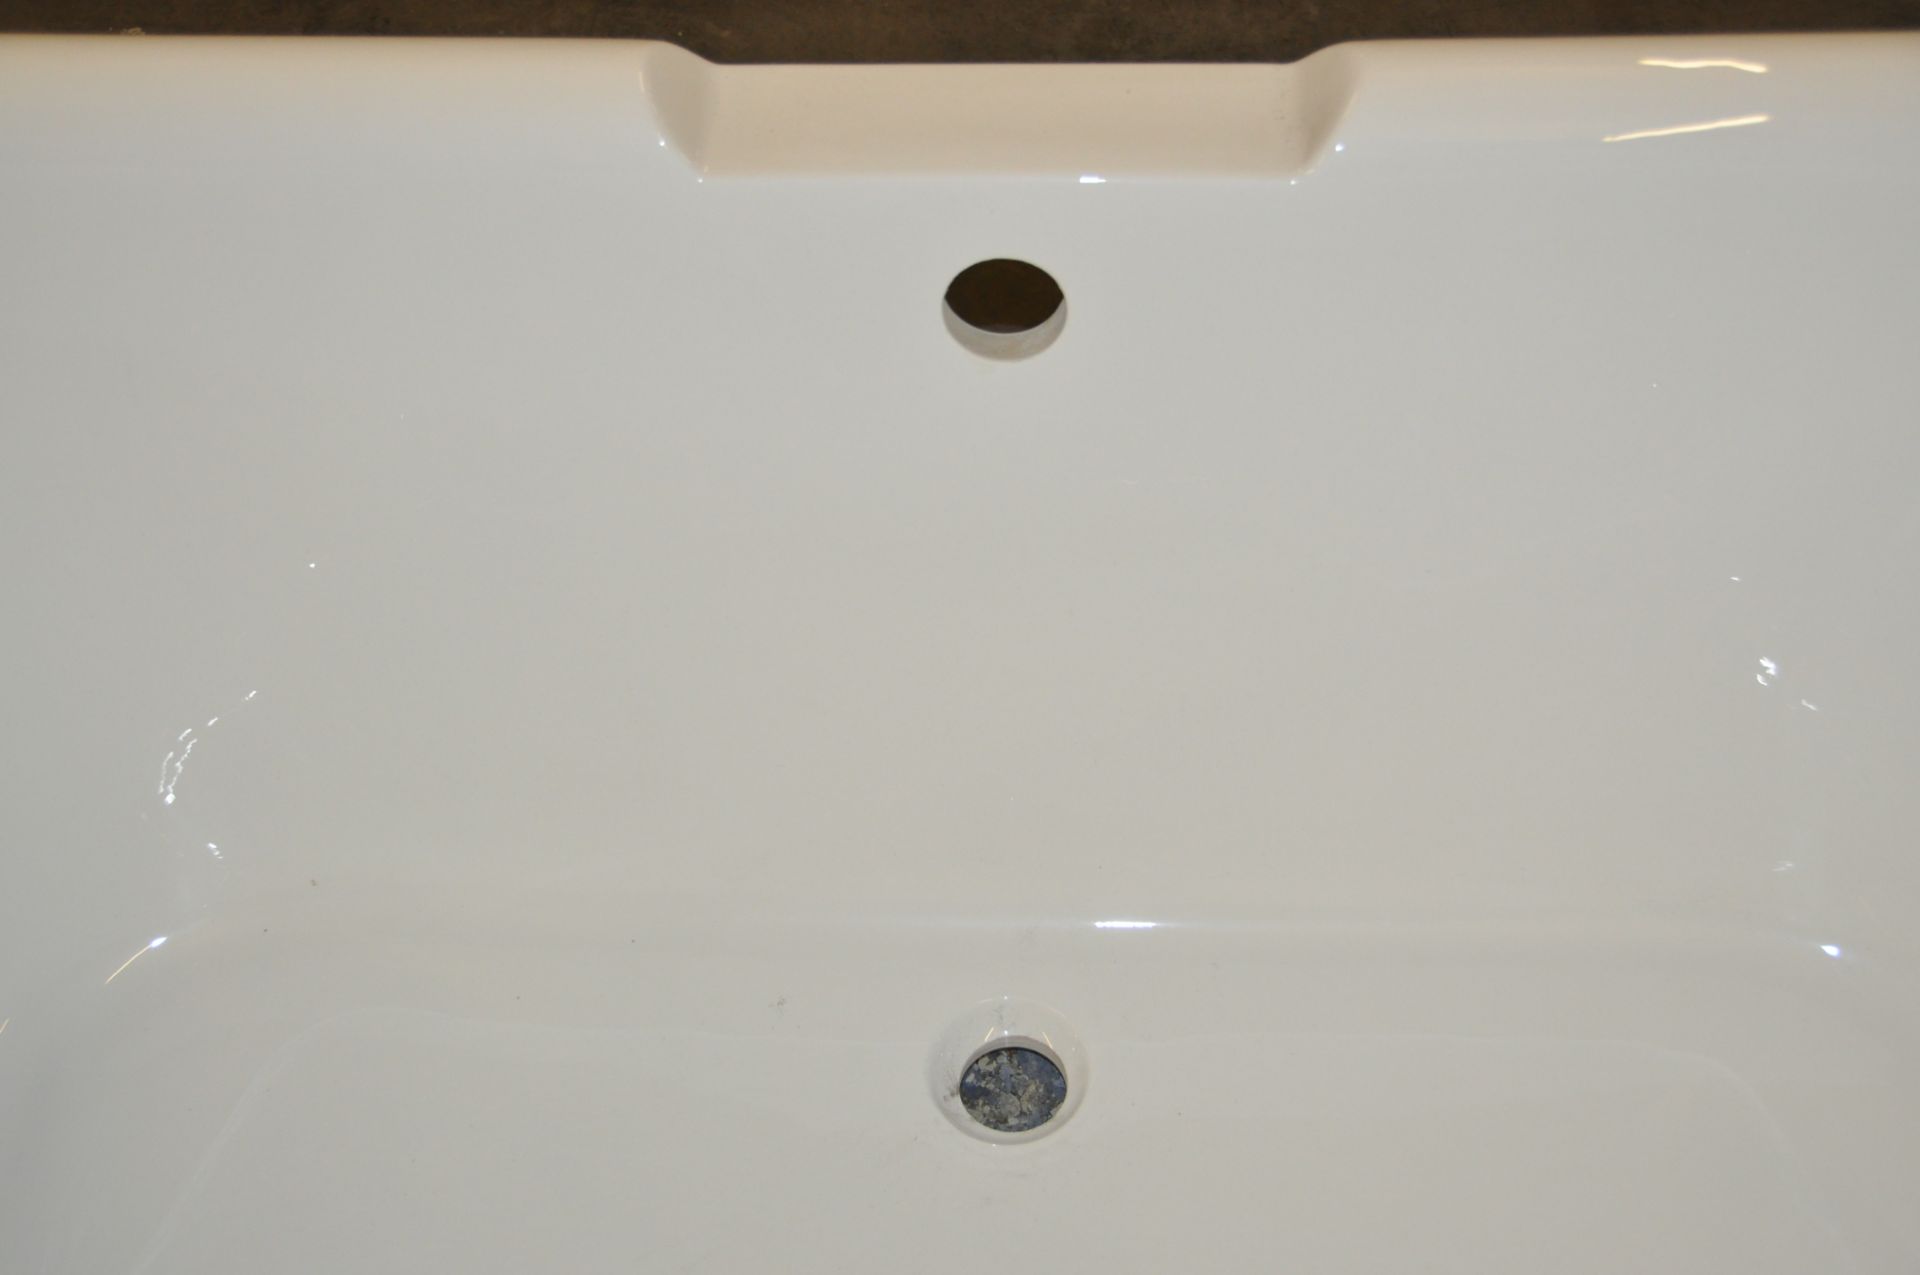 1 x Freestanding Roll Top Bath - With Central Waste and Tap Section - CL022 - Location: Bolton BL1 - - Image 4 of 4